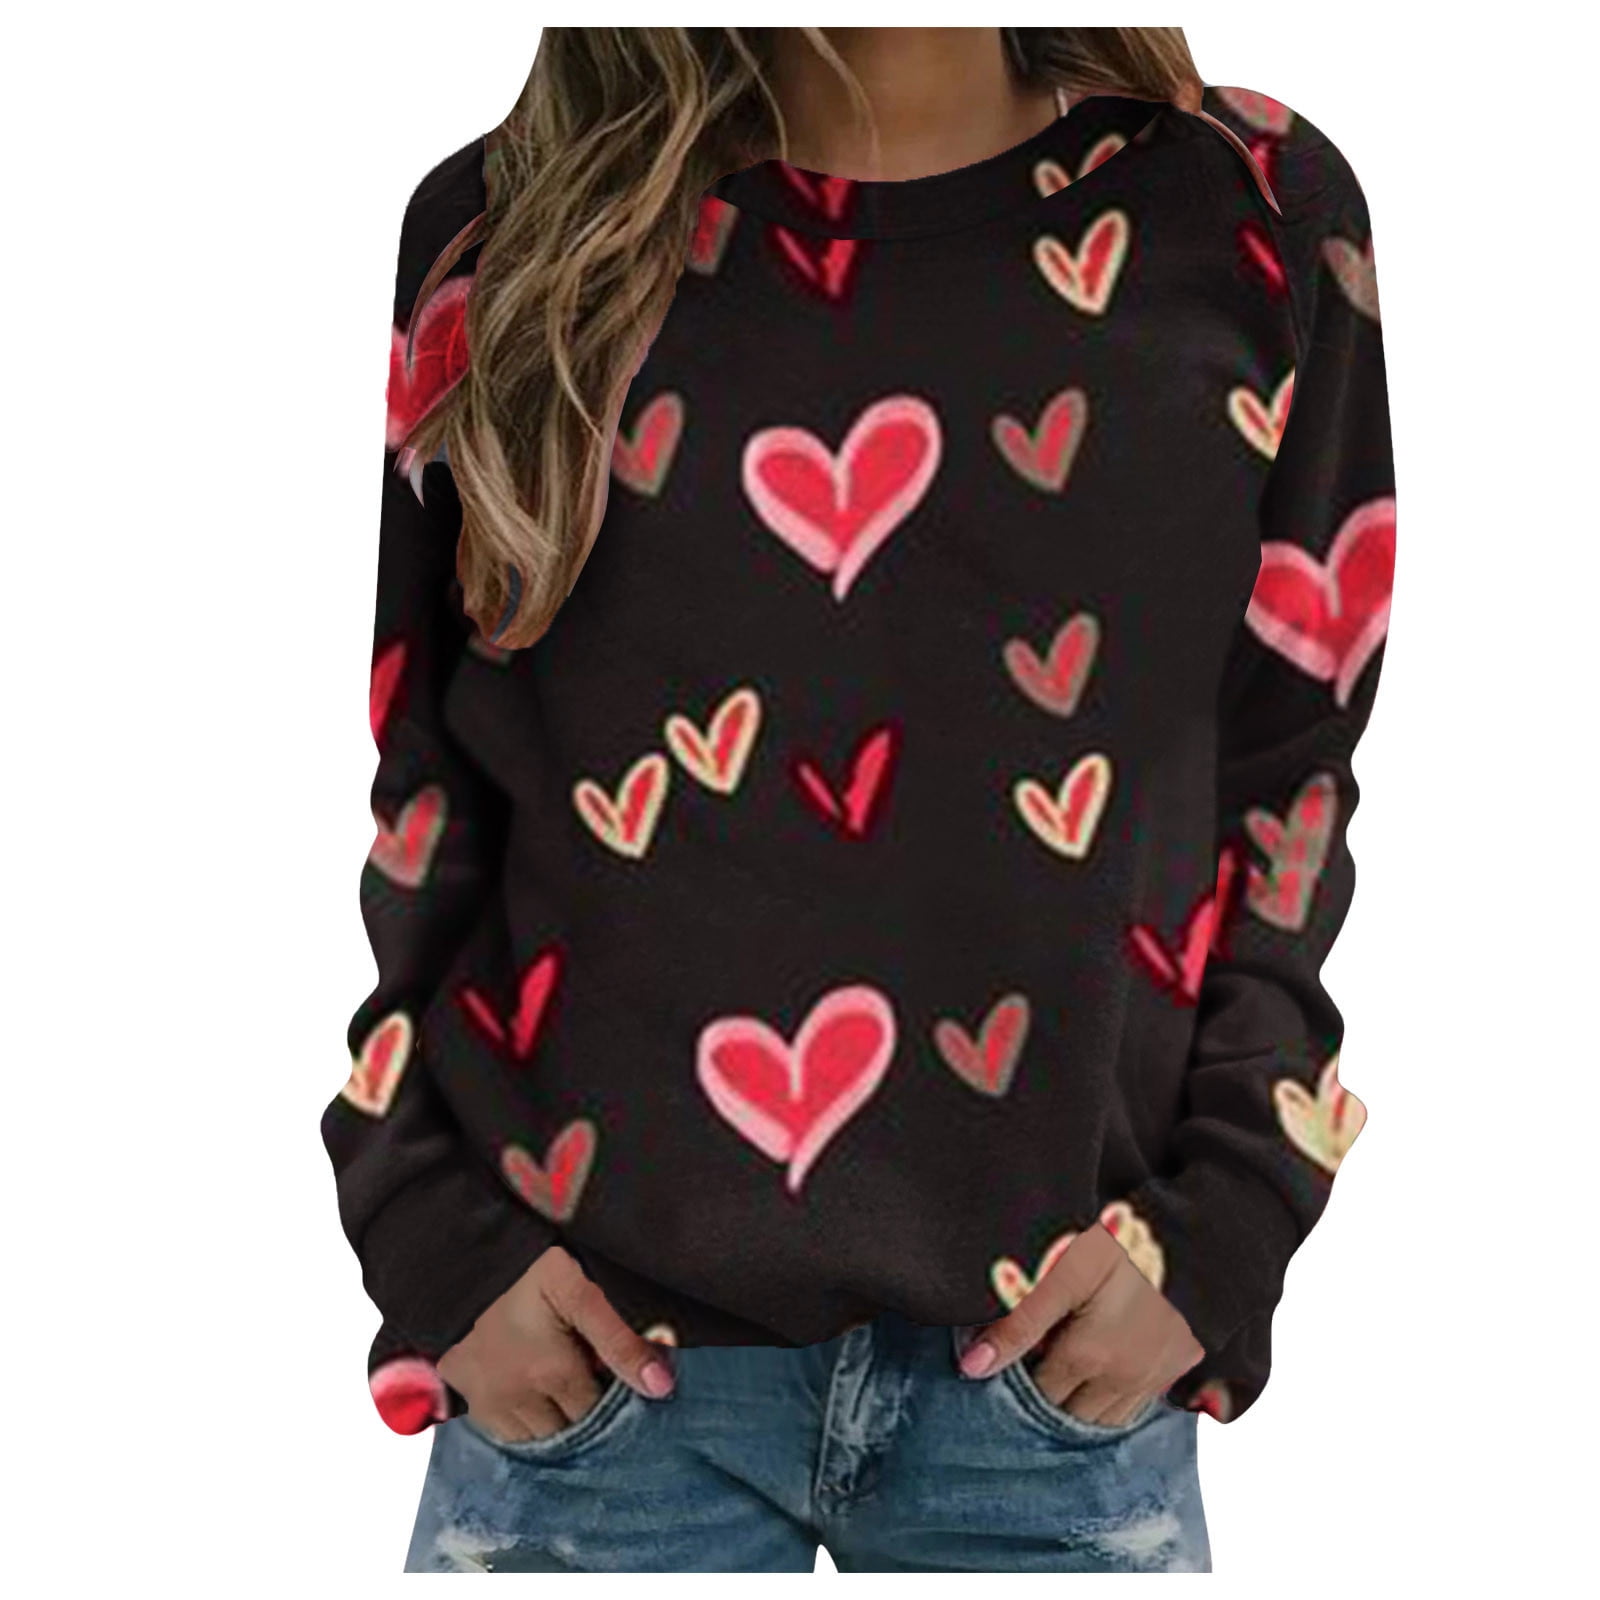 Aoochasliy Ladies Tops Long Sleeve Clearance Valentine's Day Casual ...